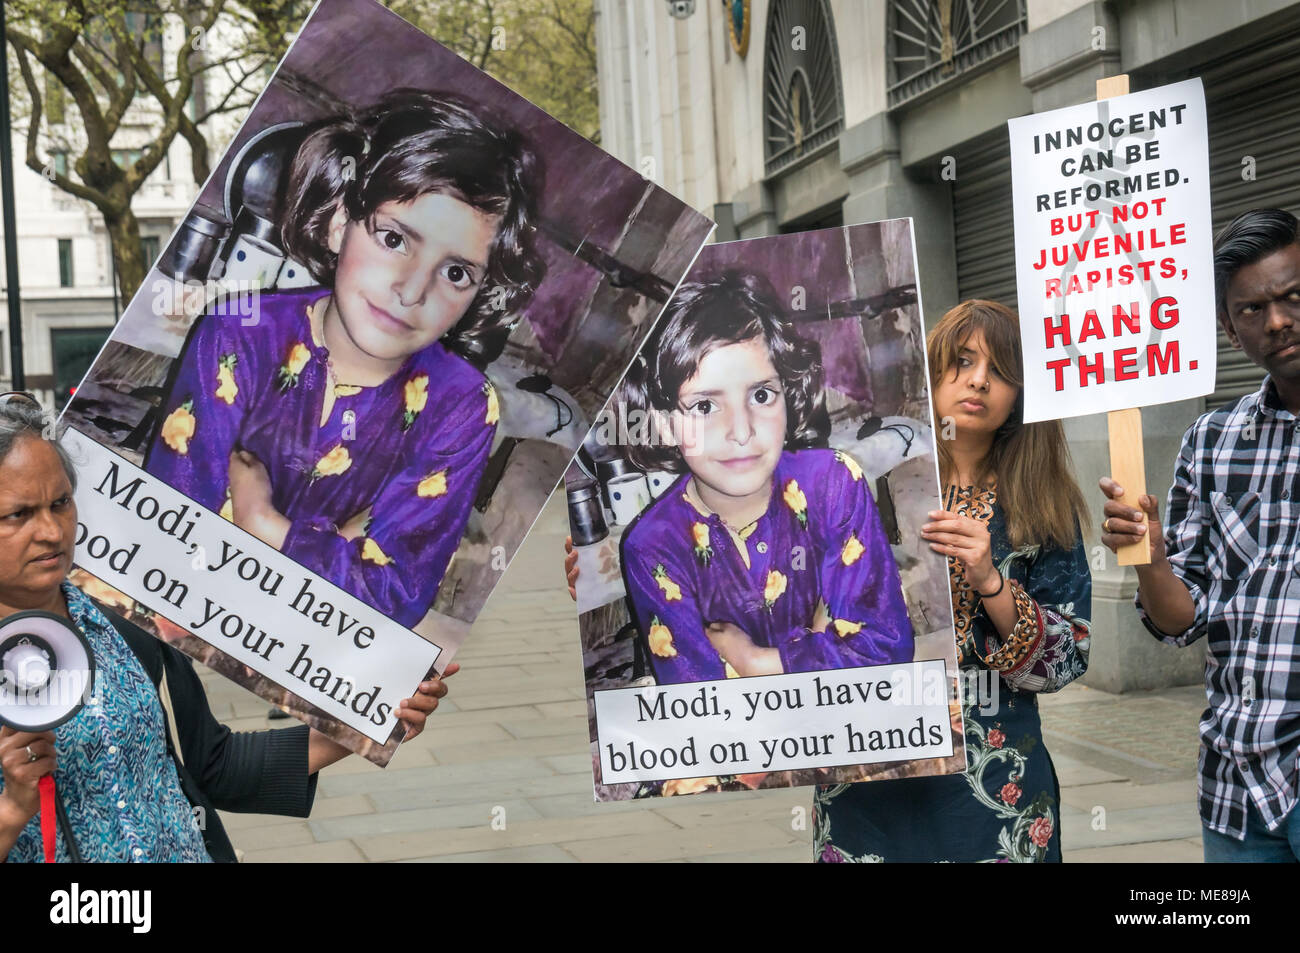 London, UK, 21 April 2018. London, UK. 21st April 2018. Protesters at India House call for the Indian government to take effective action against the rape culture that they say has been encouraged by members of the ruling BJP party, leading to an increasing number of crimes against women. Credit: Peter Marshall/Alamy Live News Stock Photo